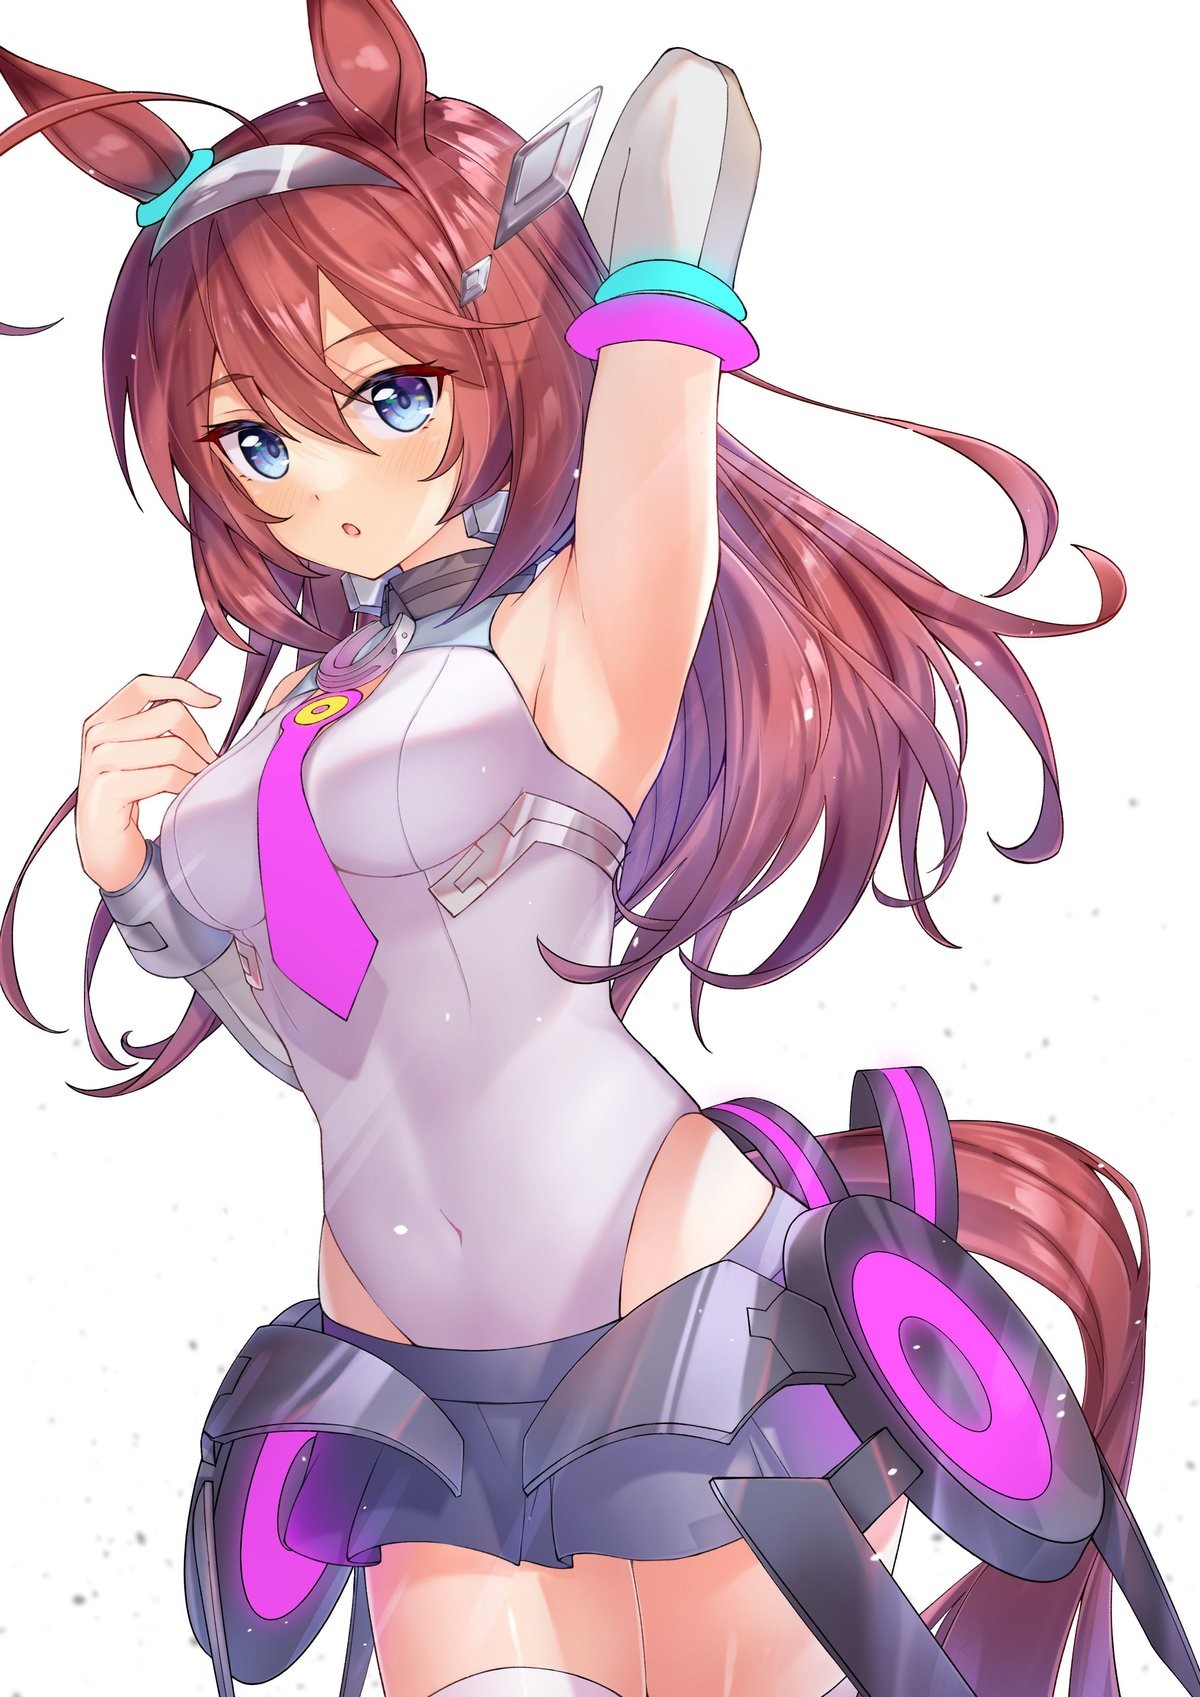 Uma Daily Waifu Post #4 - Mihono Bourbon. join list: Umawaifus (24 subs)Mention History.. The Uma Musume event currently in Granblue is pretty great. I don't give a about Uma Musume so I was considering just skipping the event story, but it's such a 